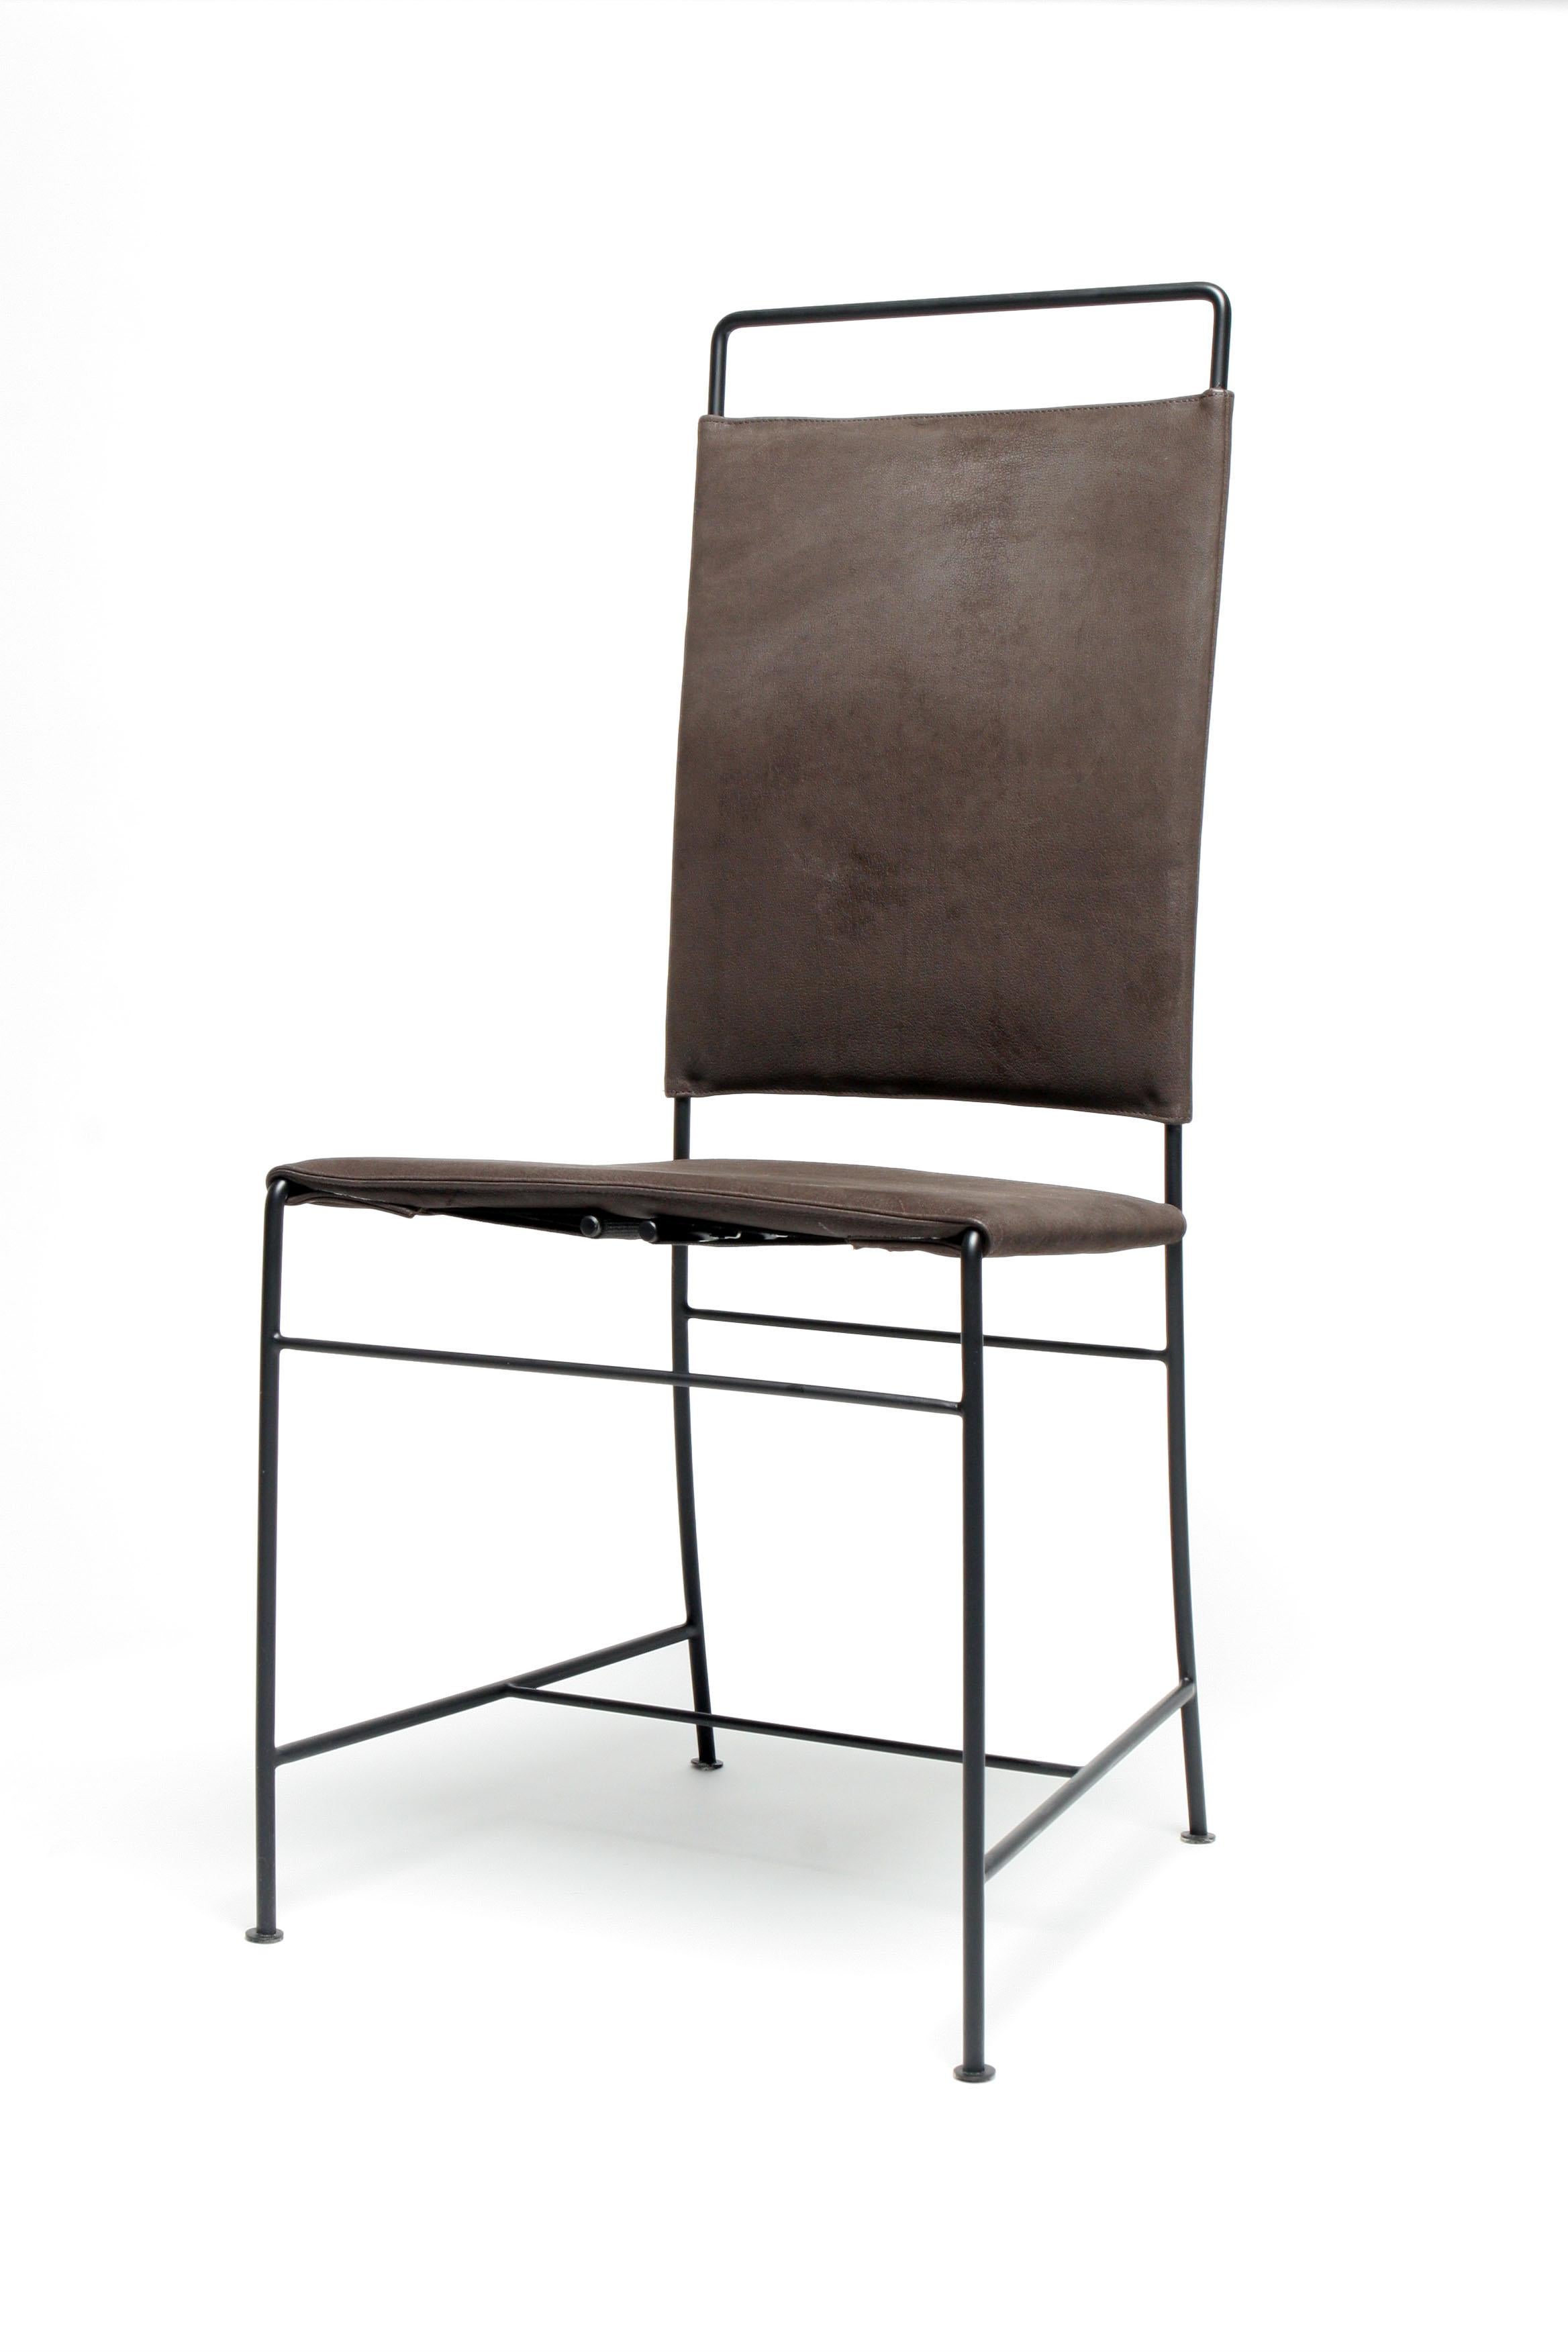 The Dodi chair has a blackened steel frame with a tight wrapped leather seat and back in Espresso Buffalo Leather. Cross stretchers offer stability and the legs are finished with coin-shaped tabs.

The chair frame is also available in stainless